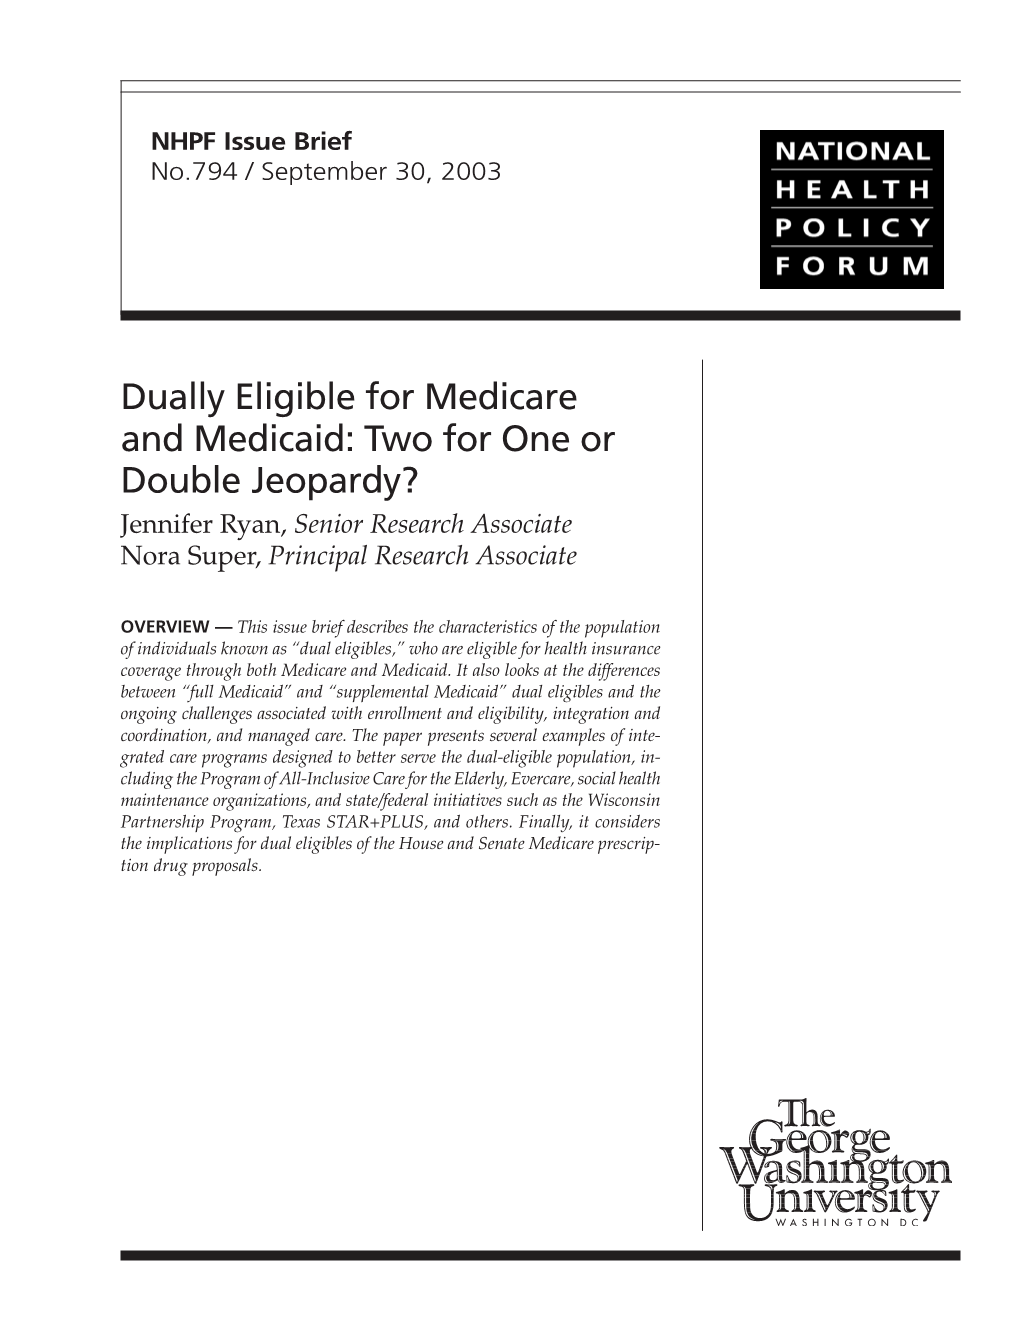 Dually Eligible for Medicare and Medicaid: Two for One Or Double Jeopardy? Jennifer Ryan, Senior Research Associate Nora Super, Principal Research Associate